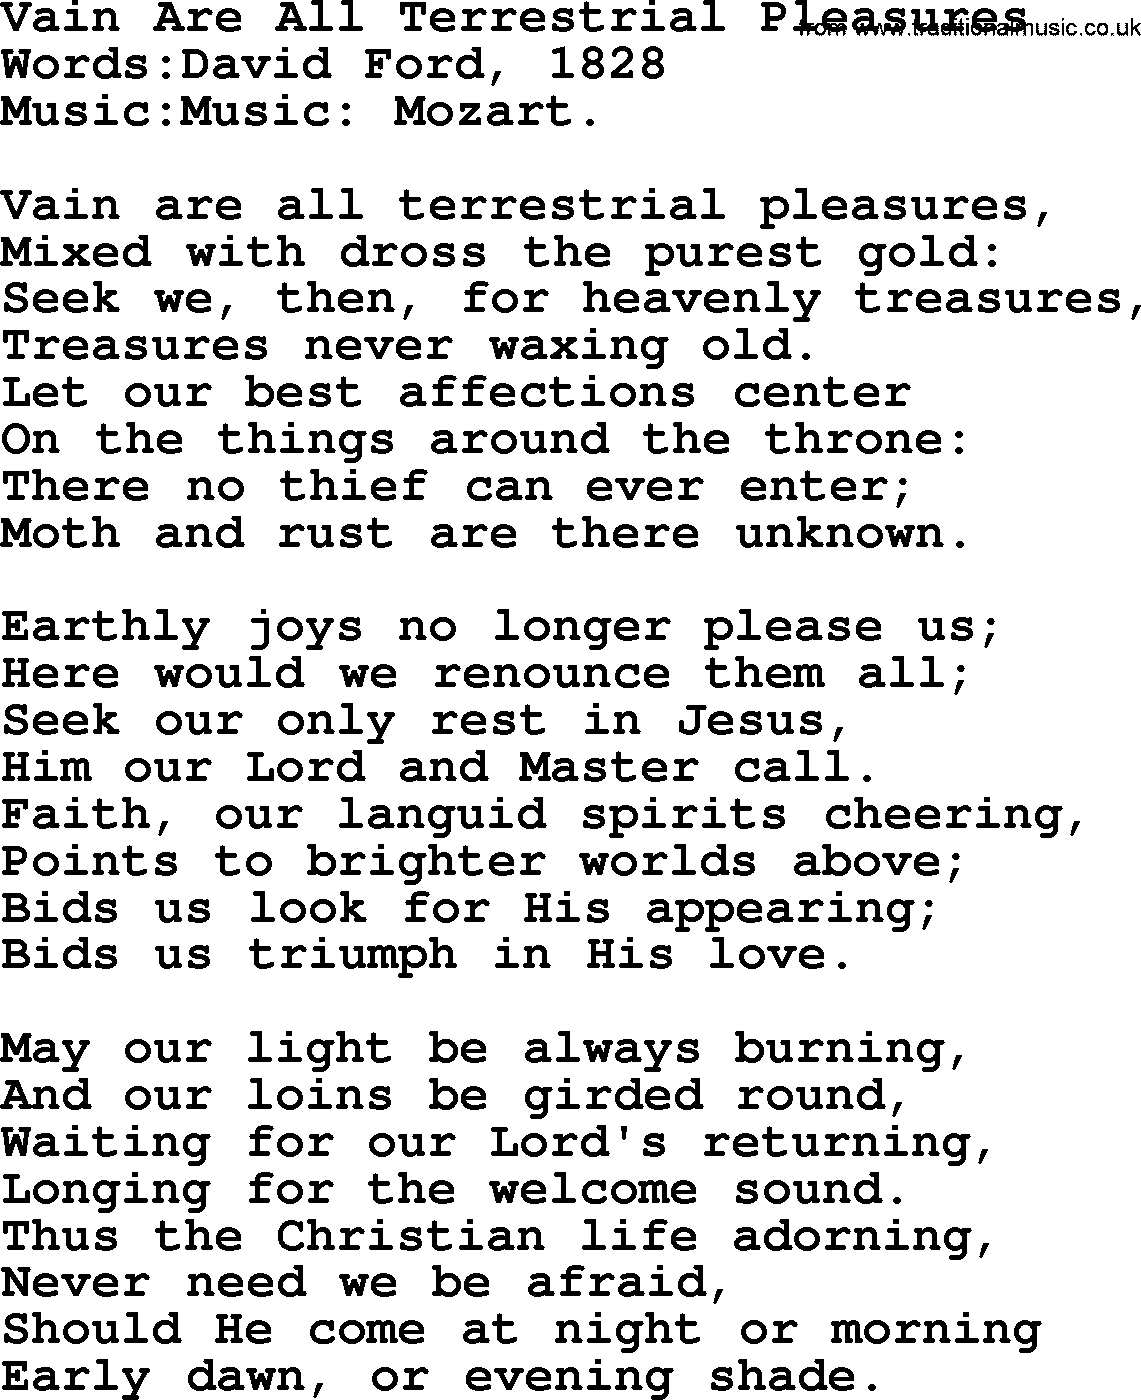 Songs and Hymns about Heaven: Vain Are All Terrestrial Pleasures lyrics with PDF